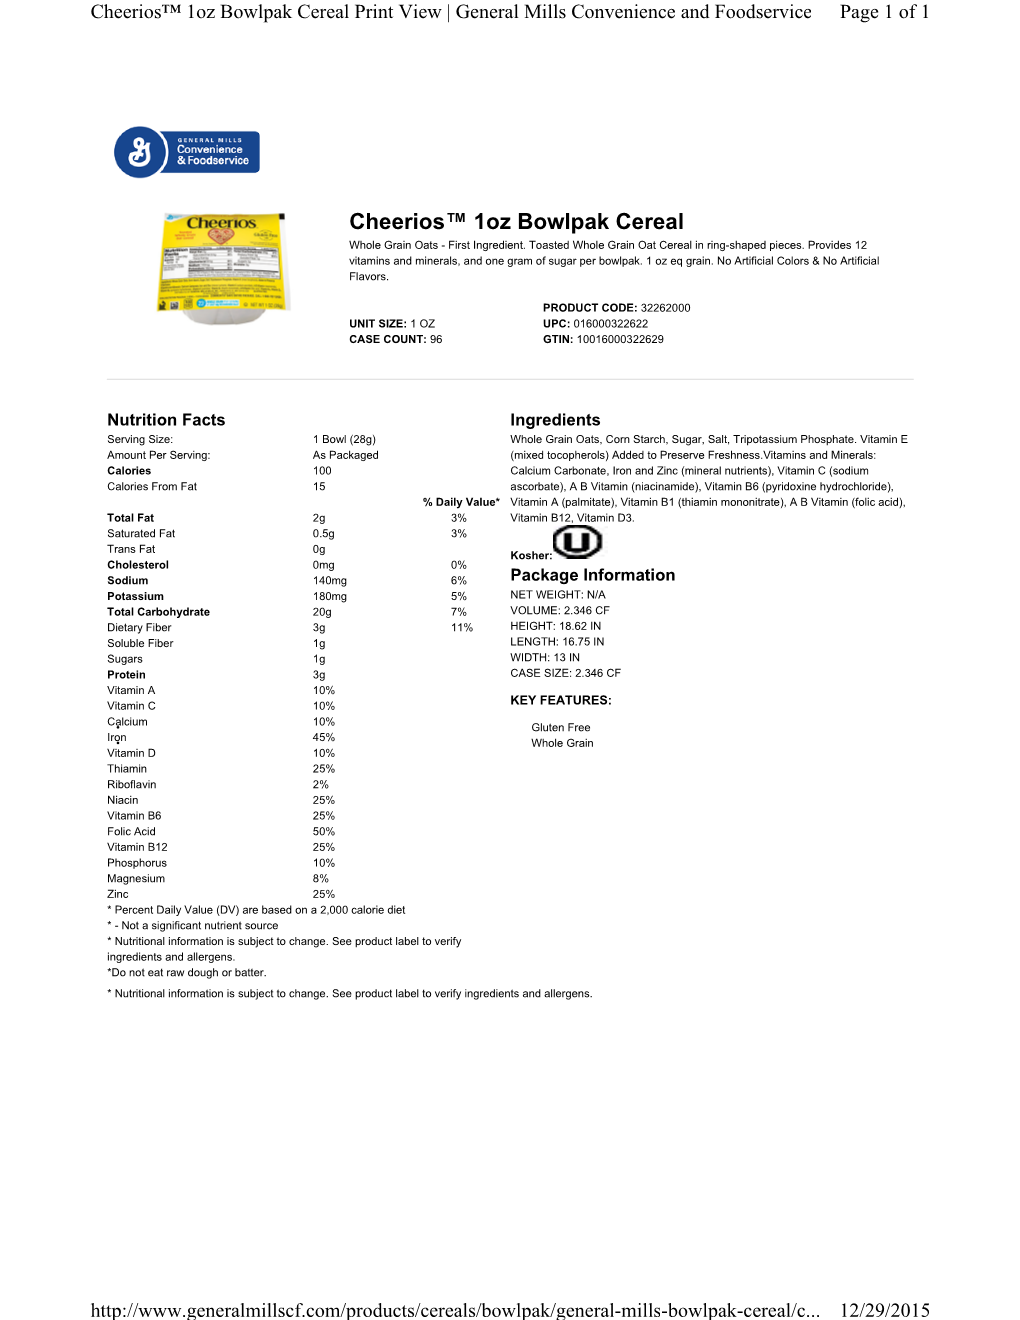 Cheerios™ 1Oz Bowlpak Cereal Print View | General Mills Convenience and Foodservice Page 1 of 1